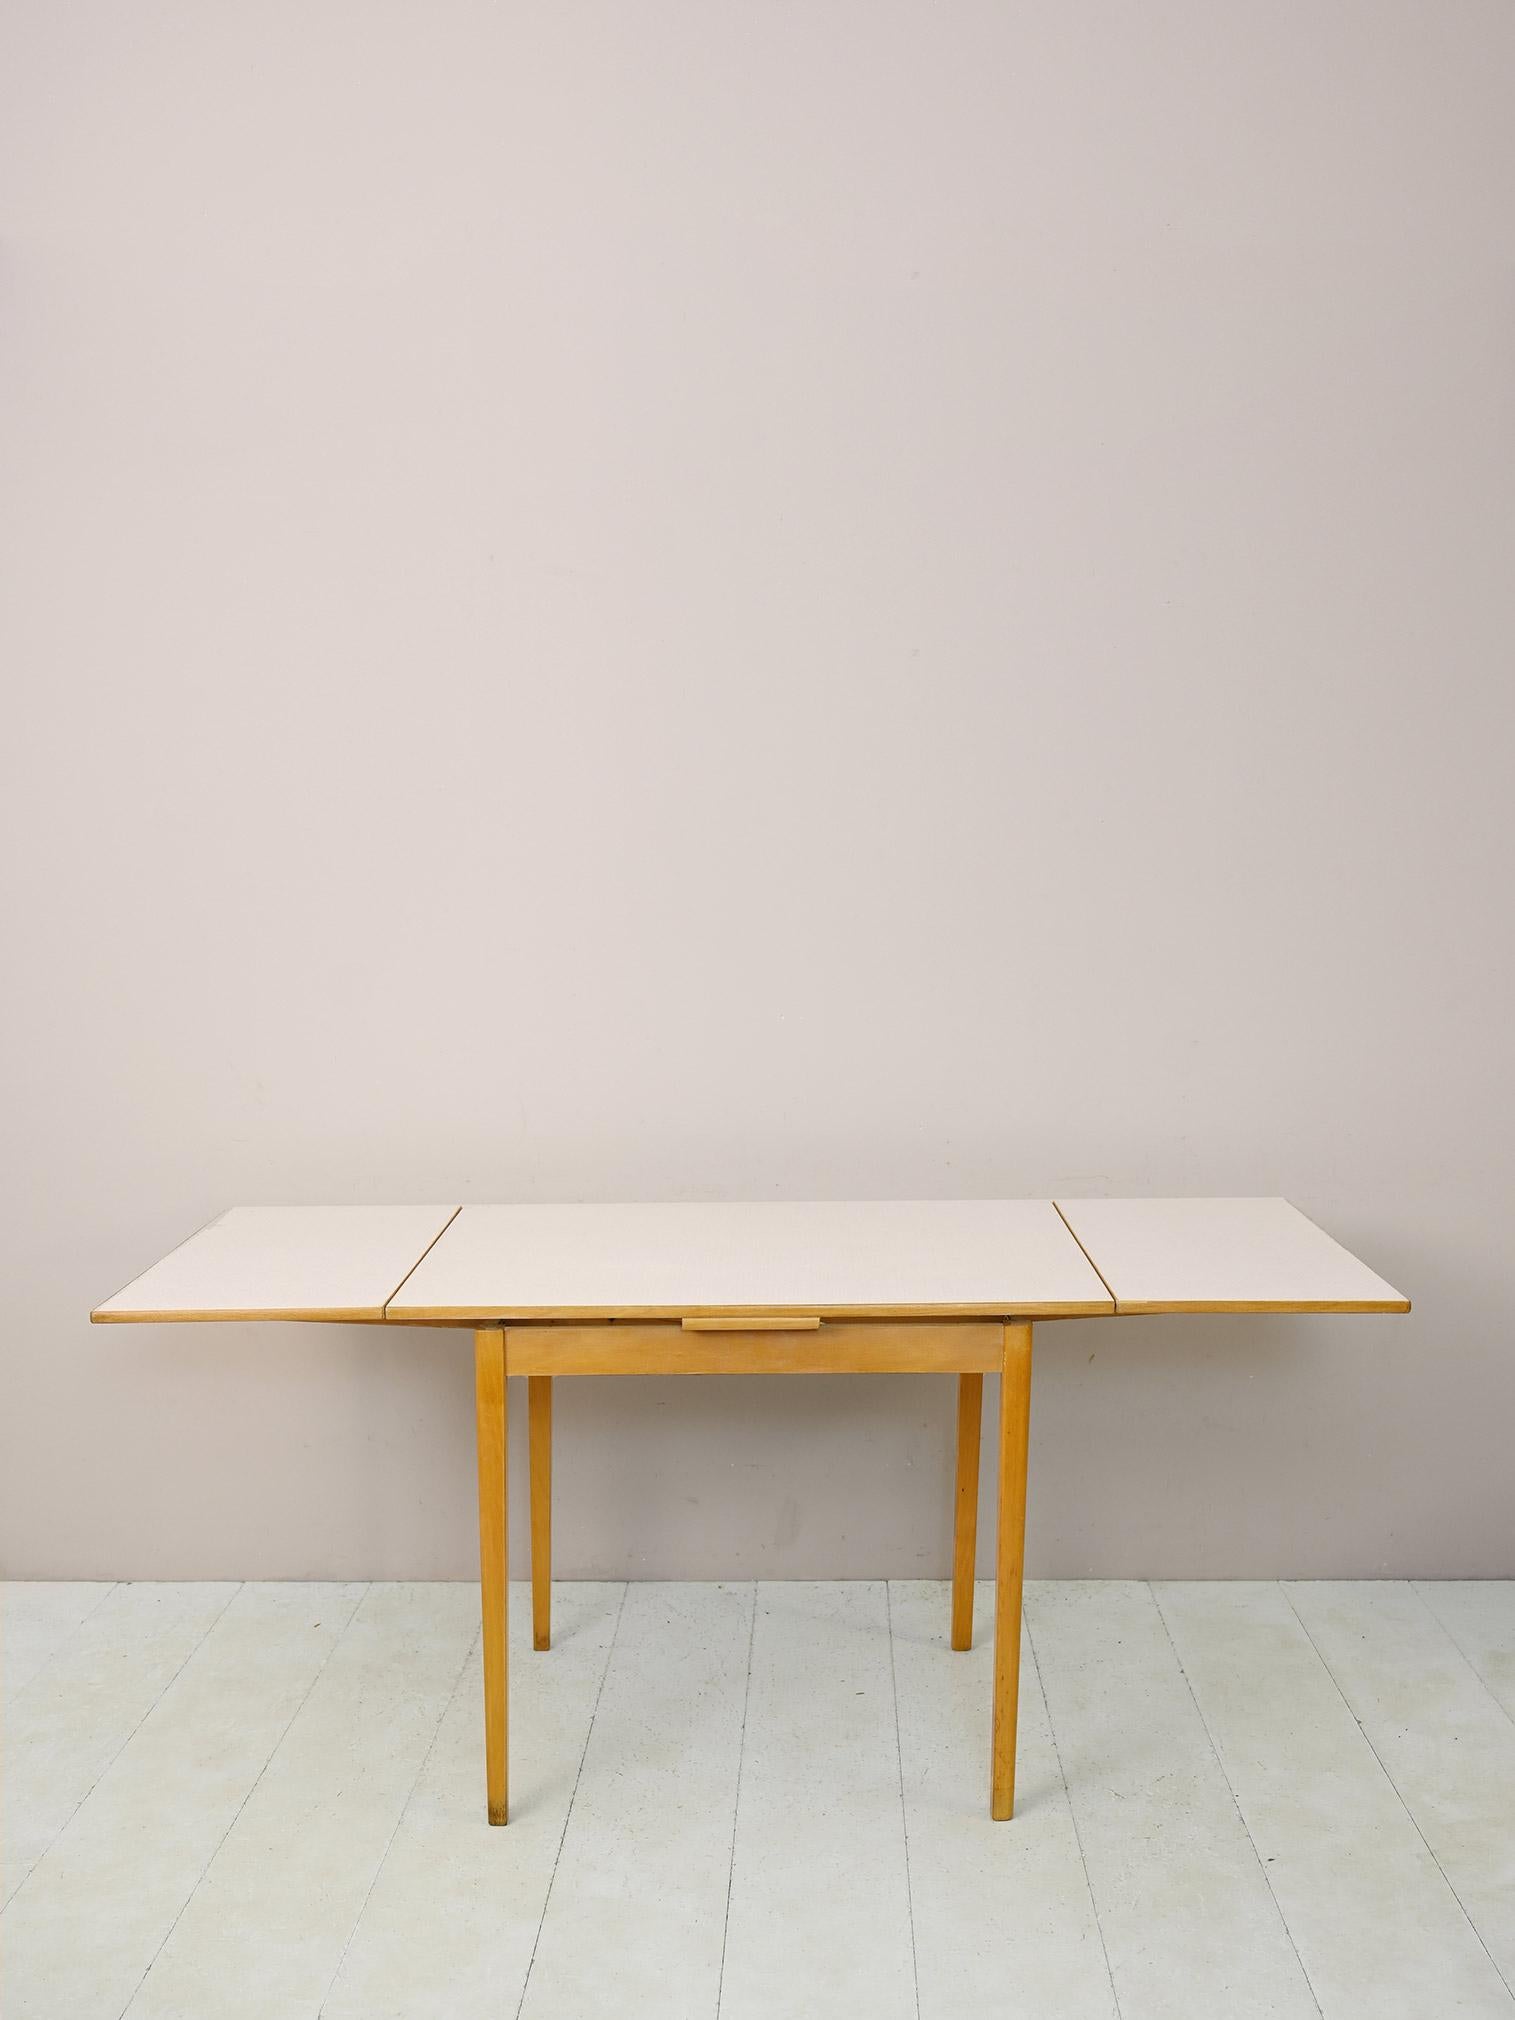 1960s dining table.

An iconic piece of mid-century design. The formica top can be extended on both sides thanks to the presence of the pull-out wings. 
The light birch wood frame and simple, square lines make it a piece of furniture suitable for